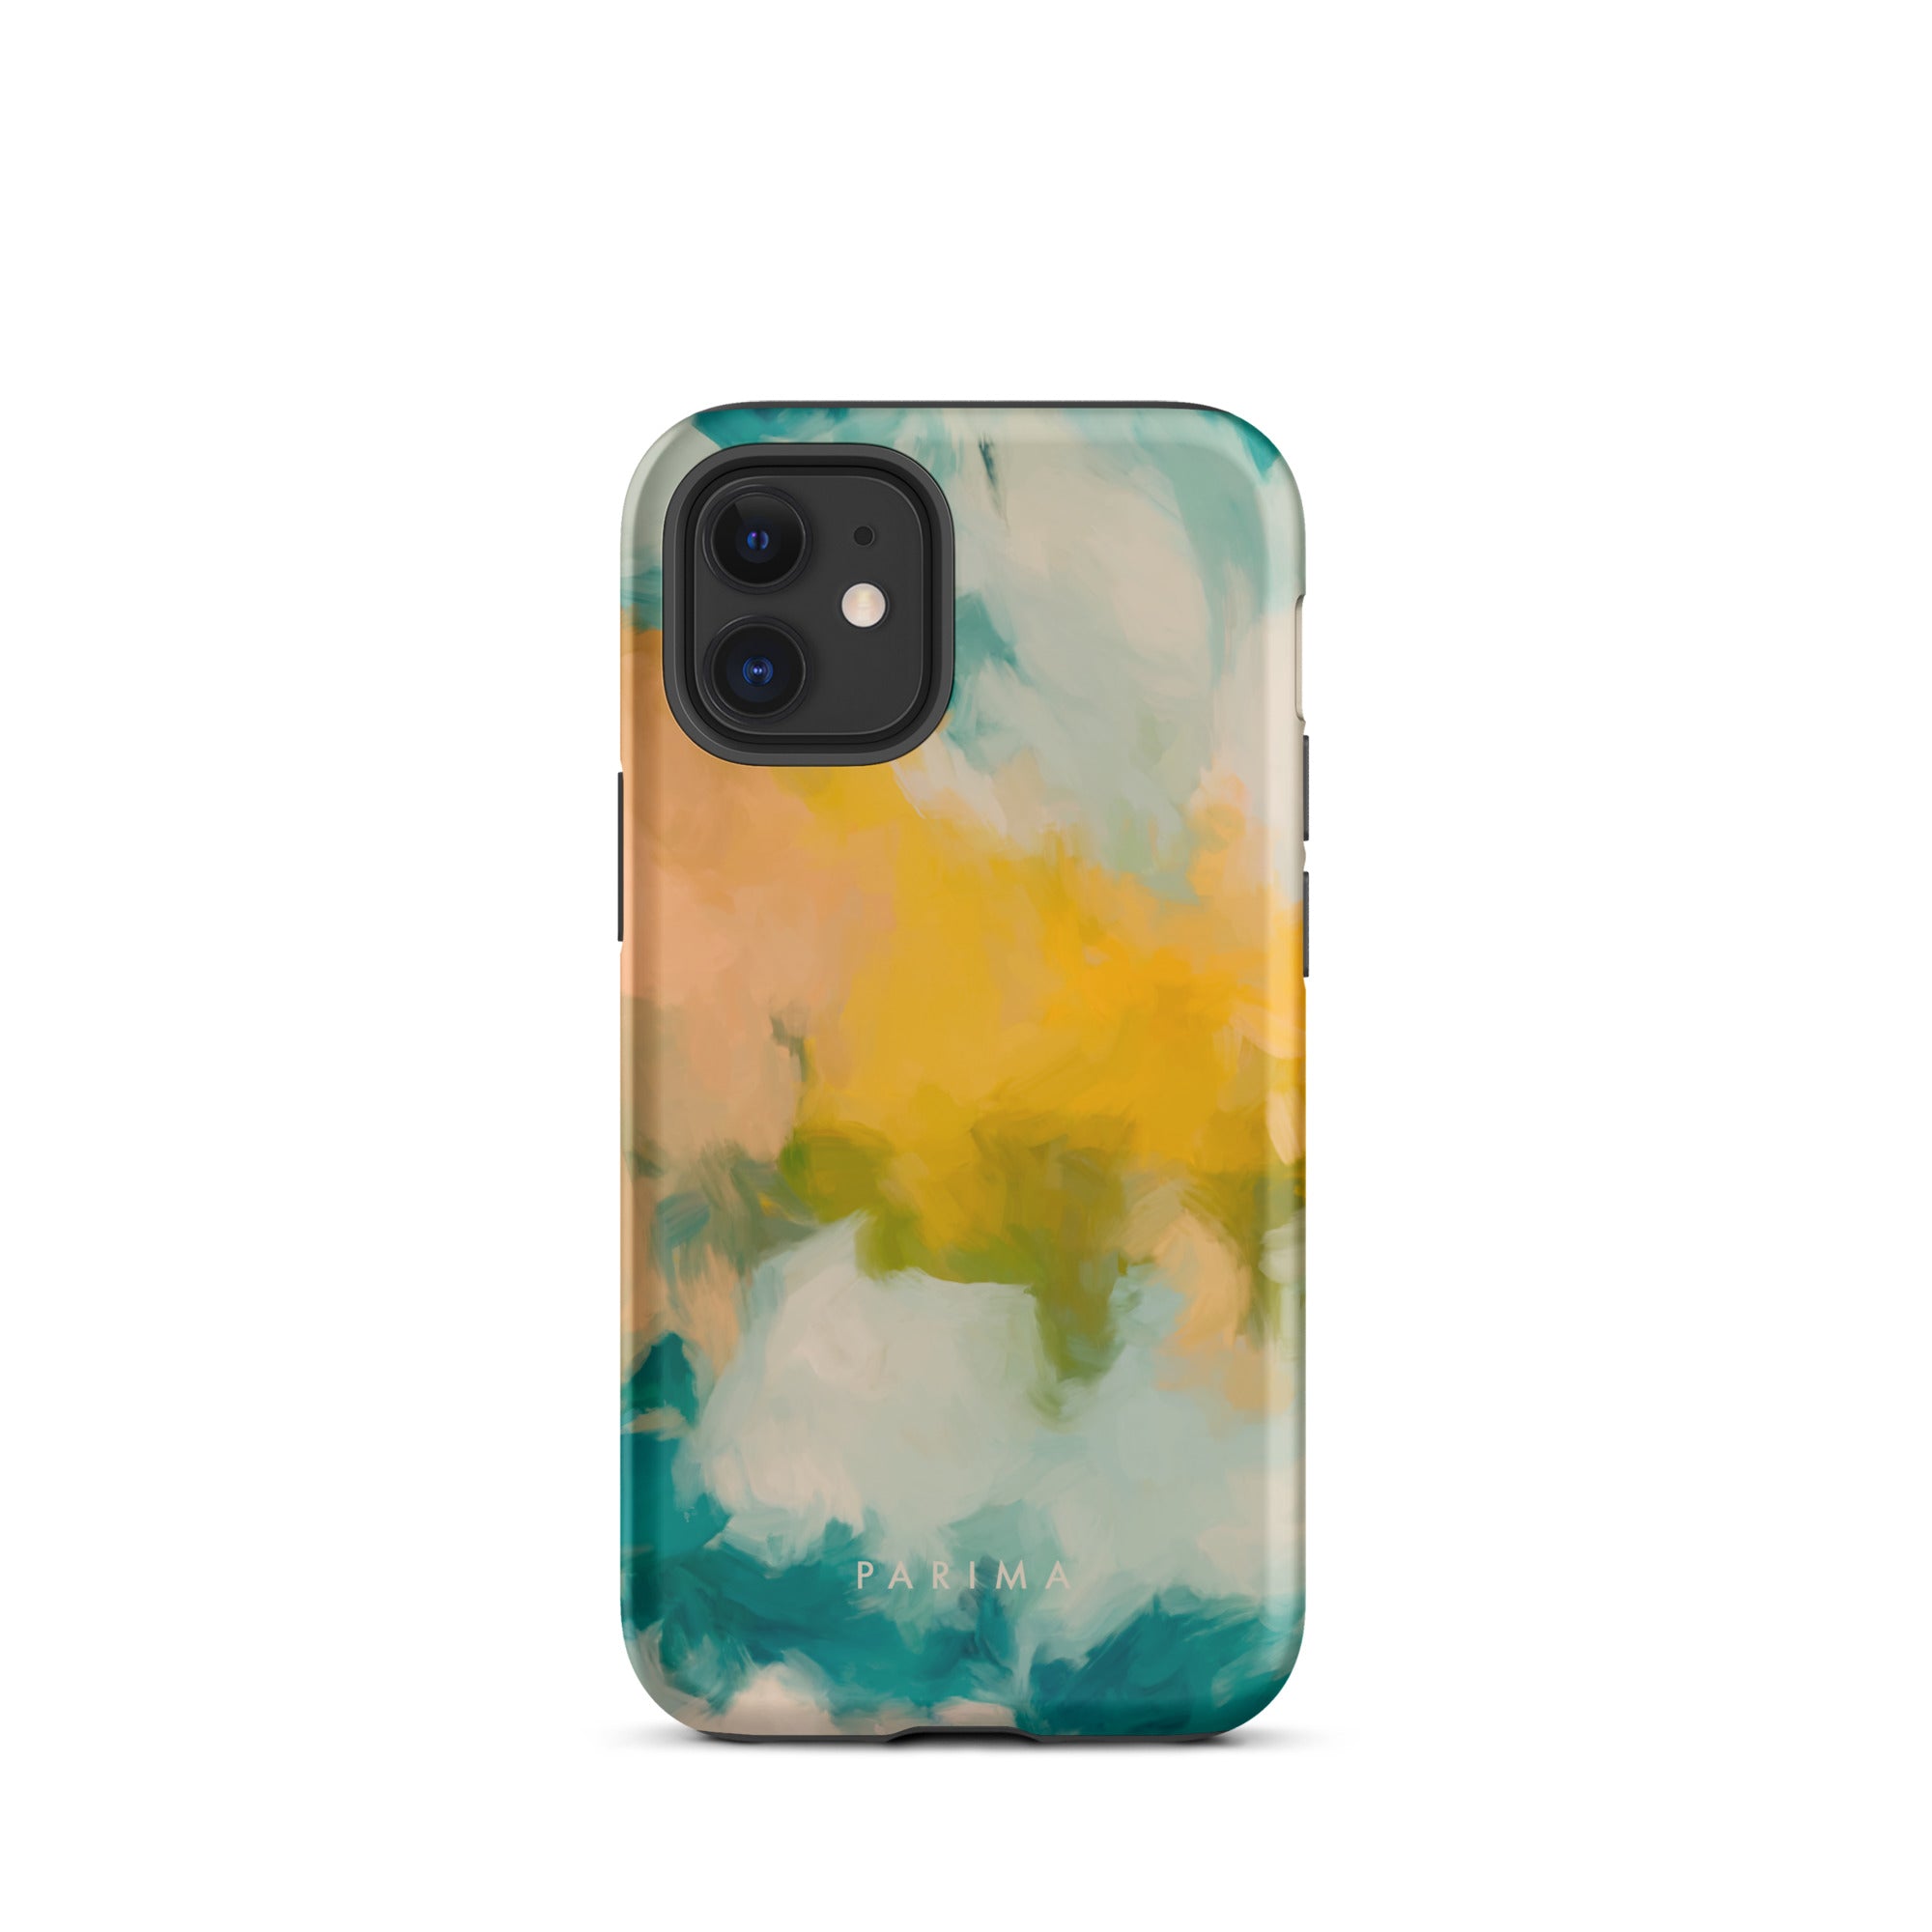 Beach Day, blue and yellow abstract art - iPhone 12 mini tough case by Parima Studio